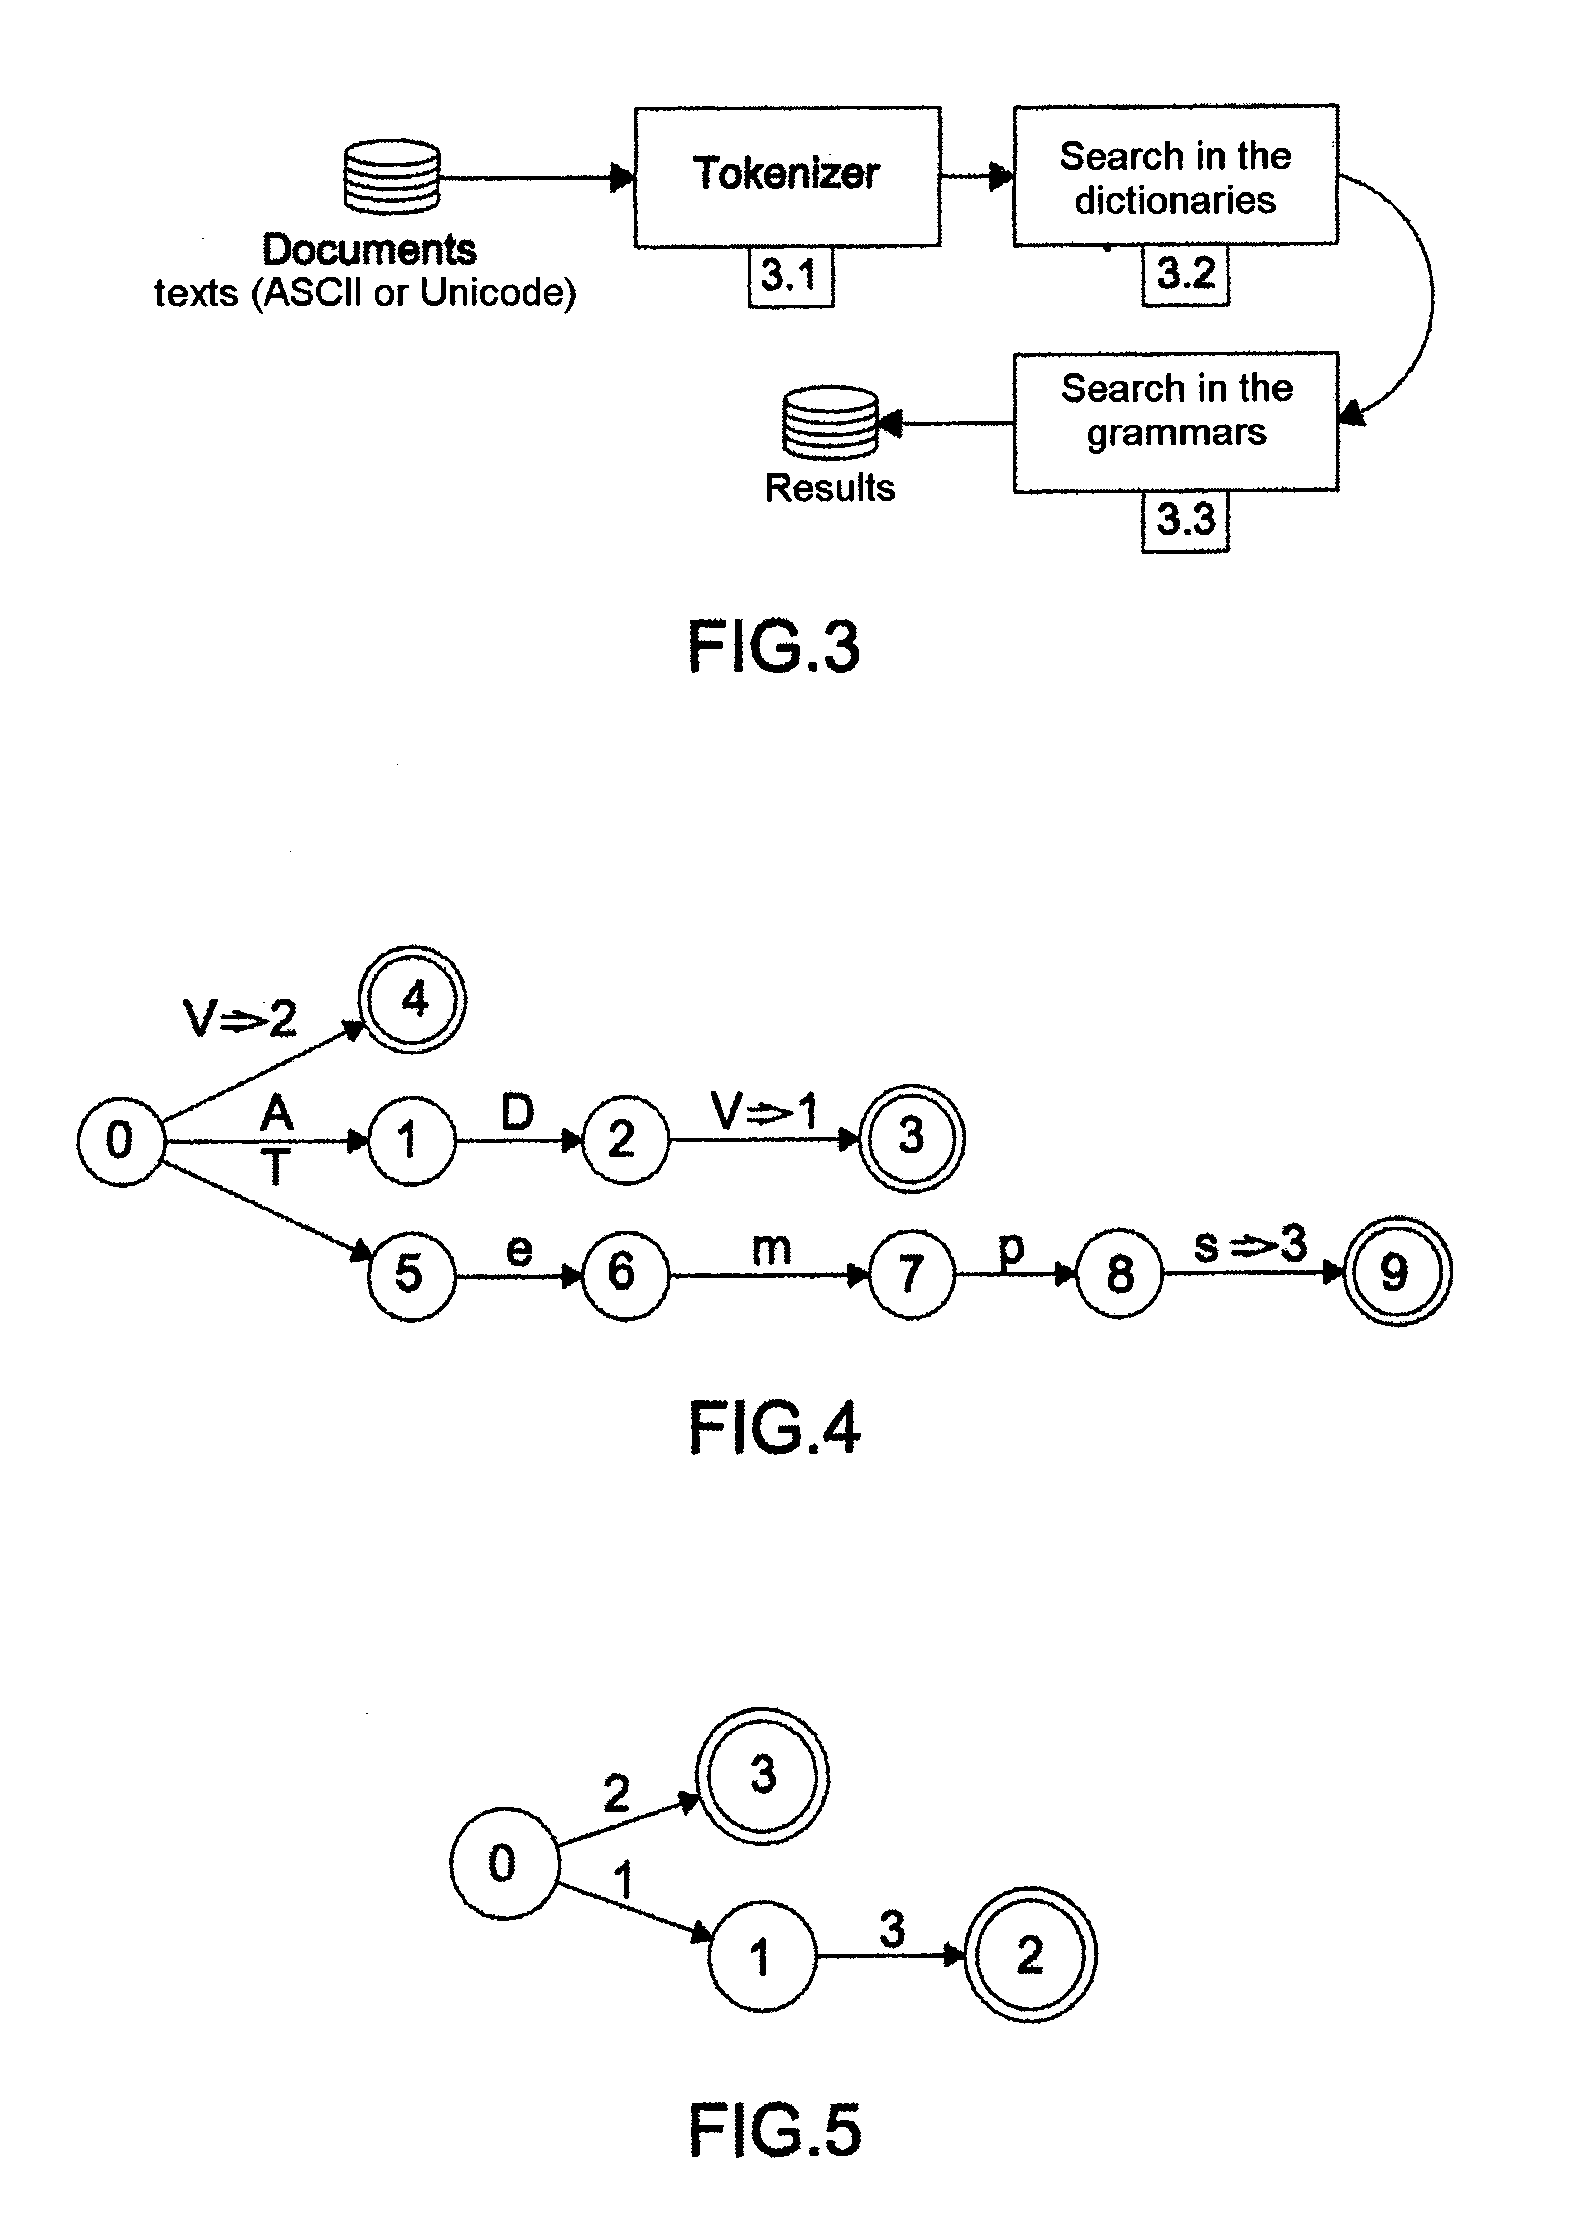 Method and device for retrieving data and transforming same into qualitative data of a text-based document